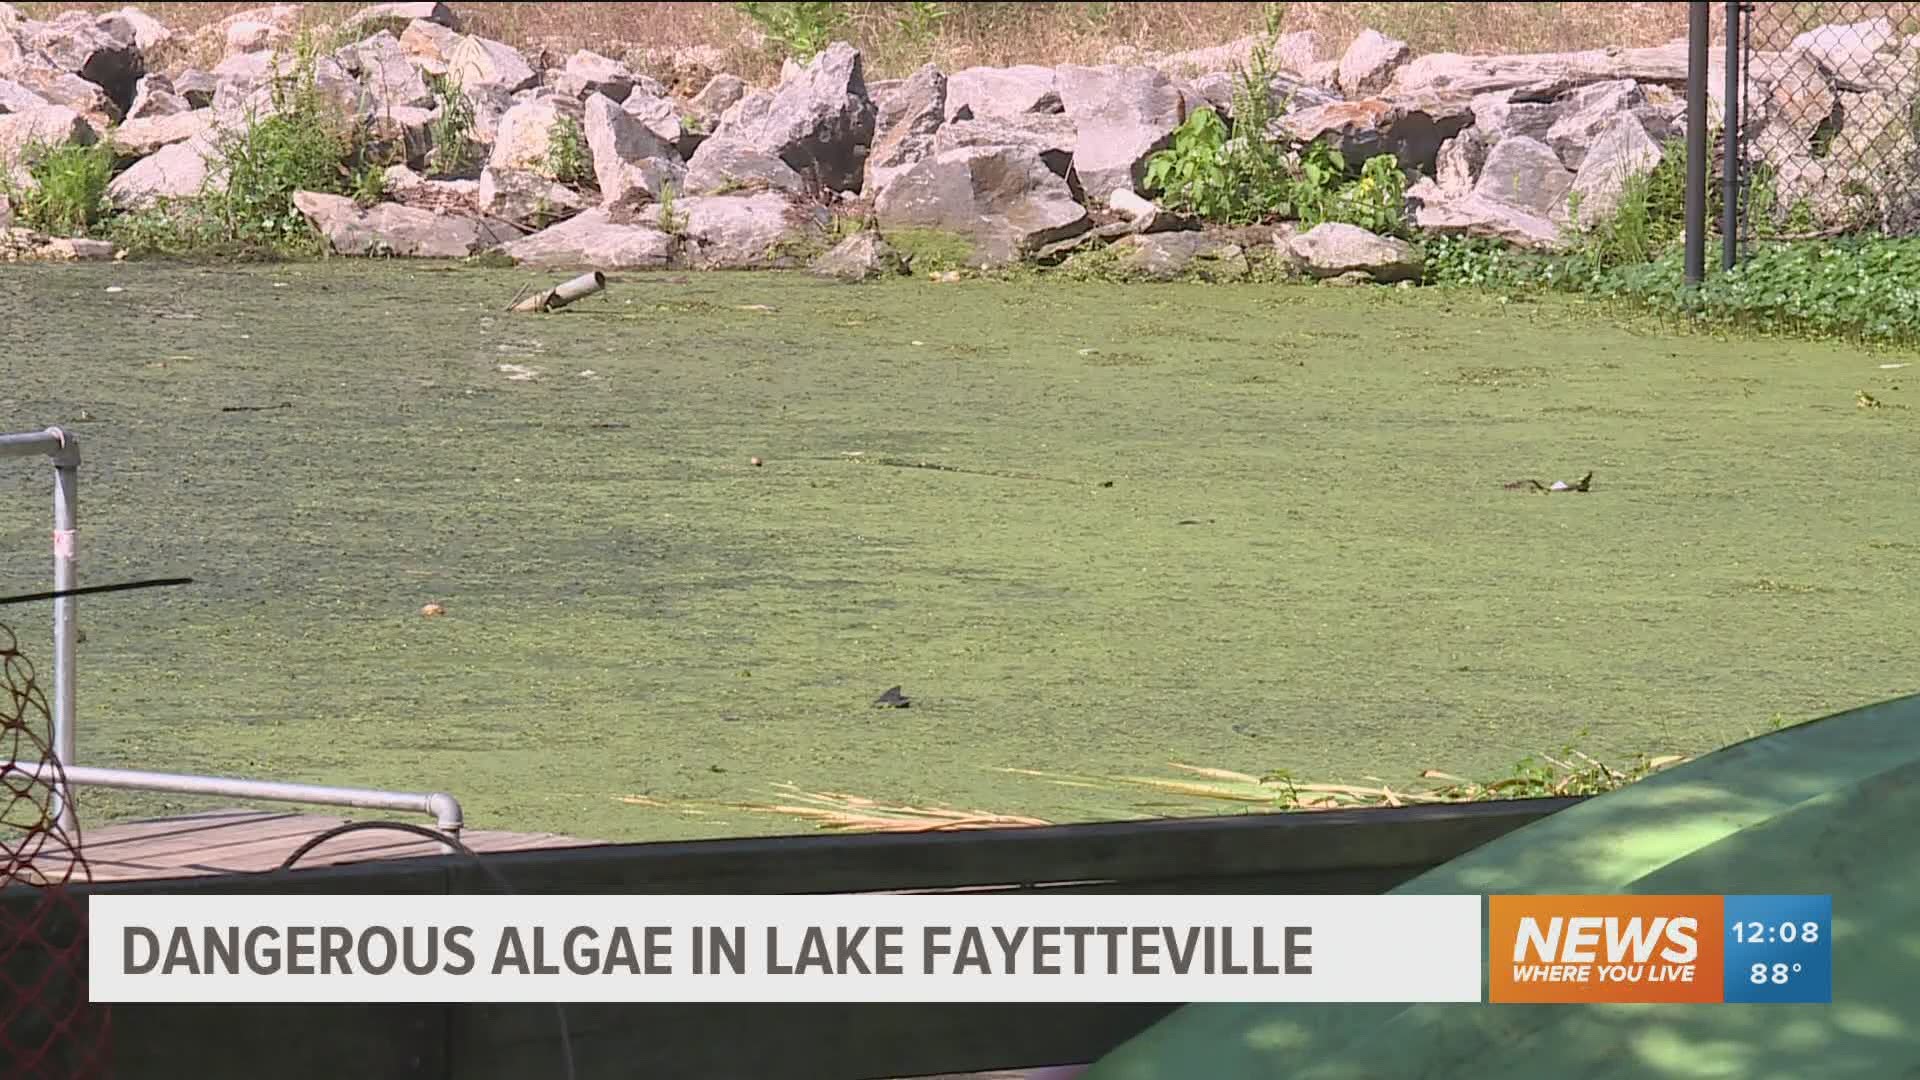 Lake Fayetteville's park manager says the water is mostly safe for activities, but precautions need to be taken.